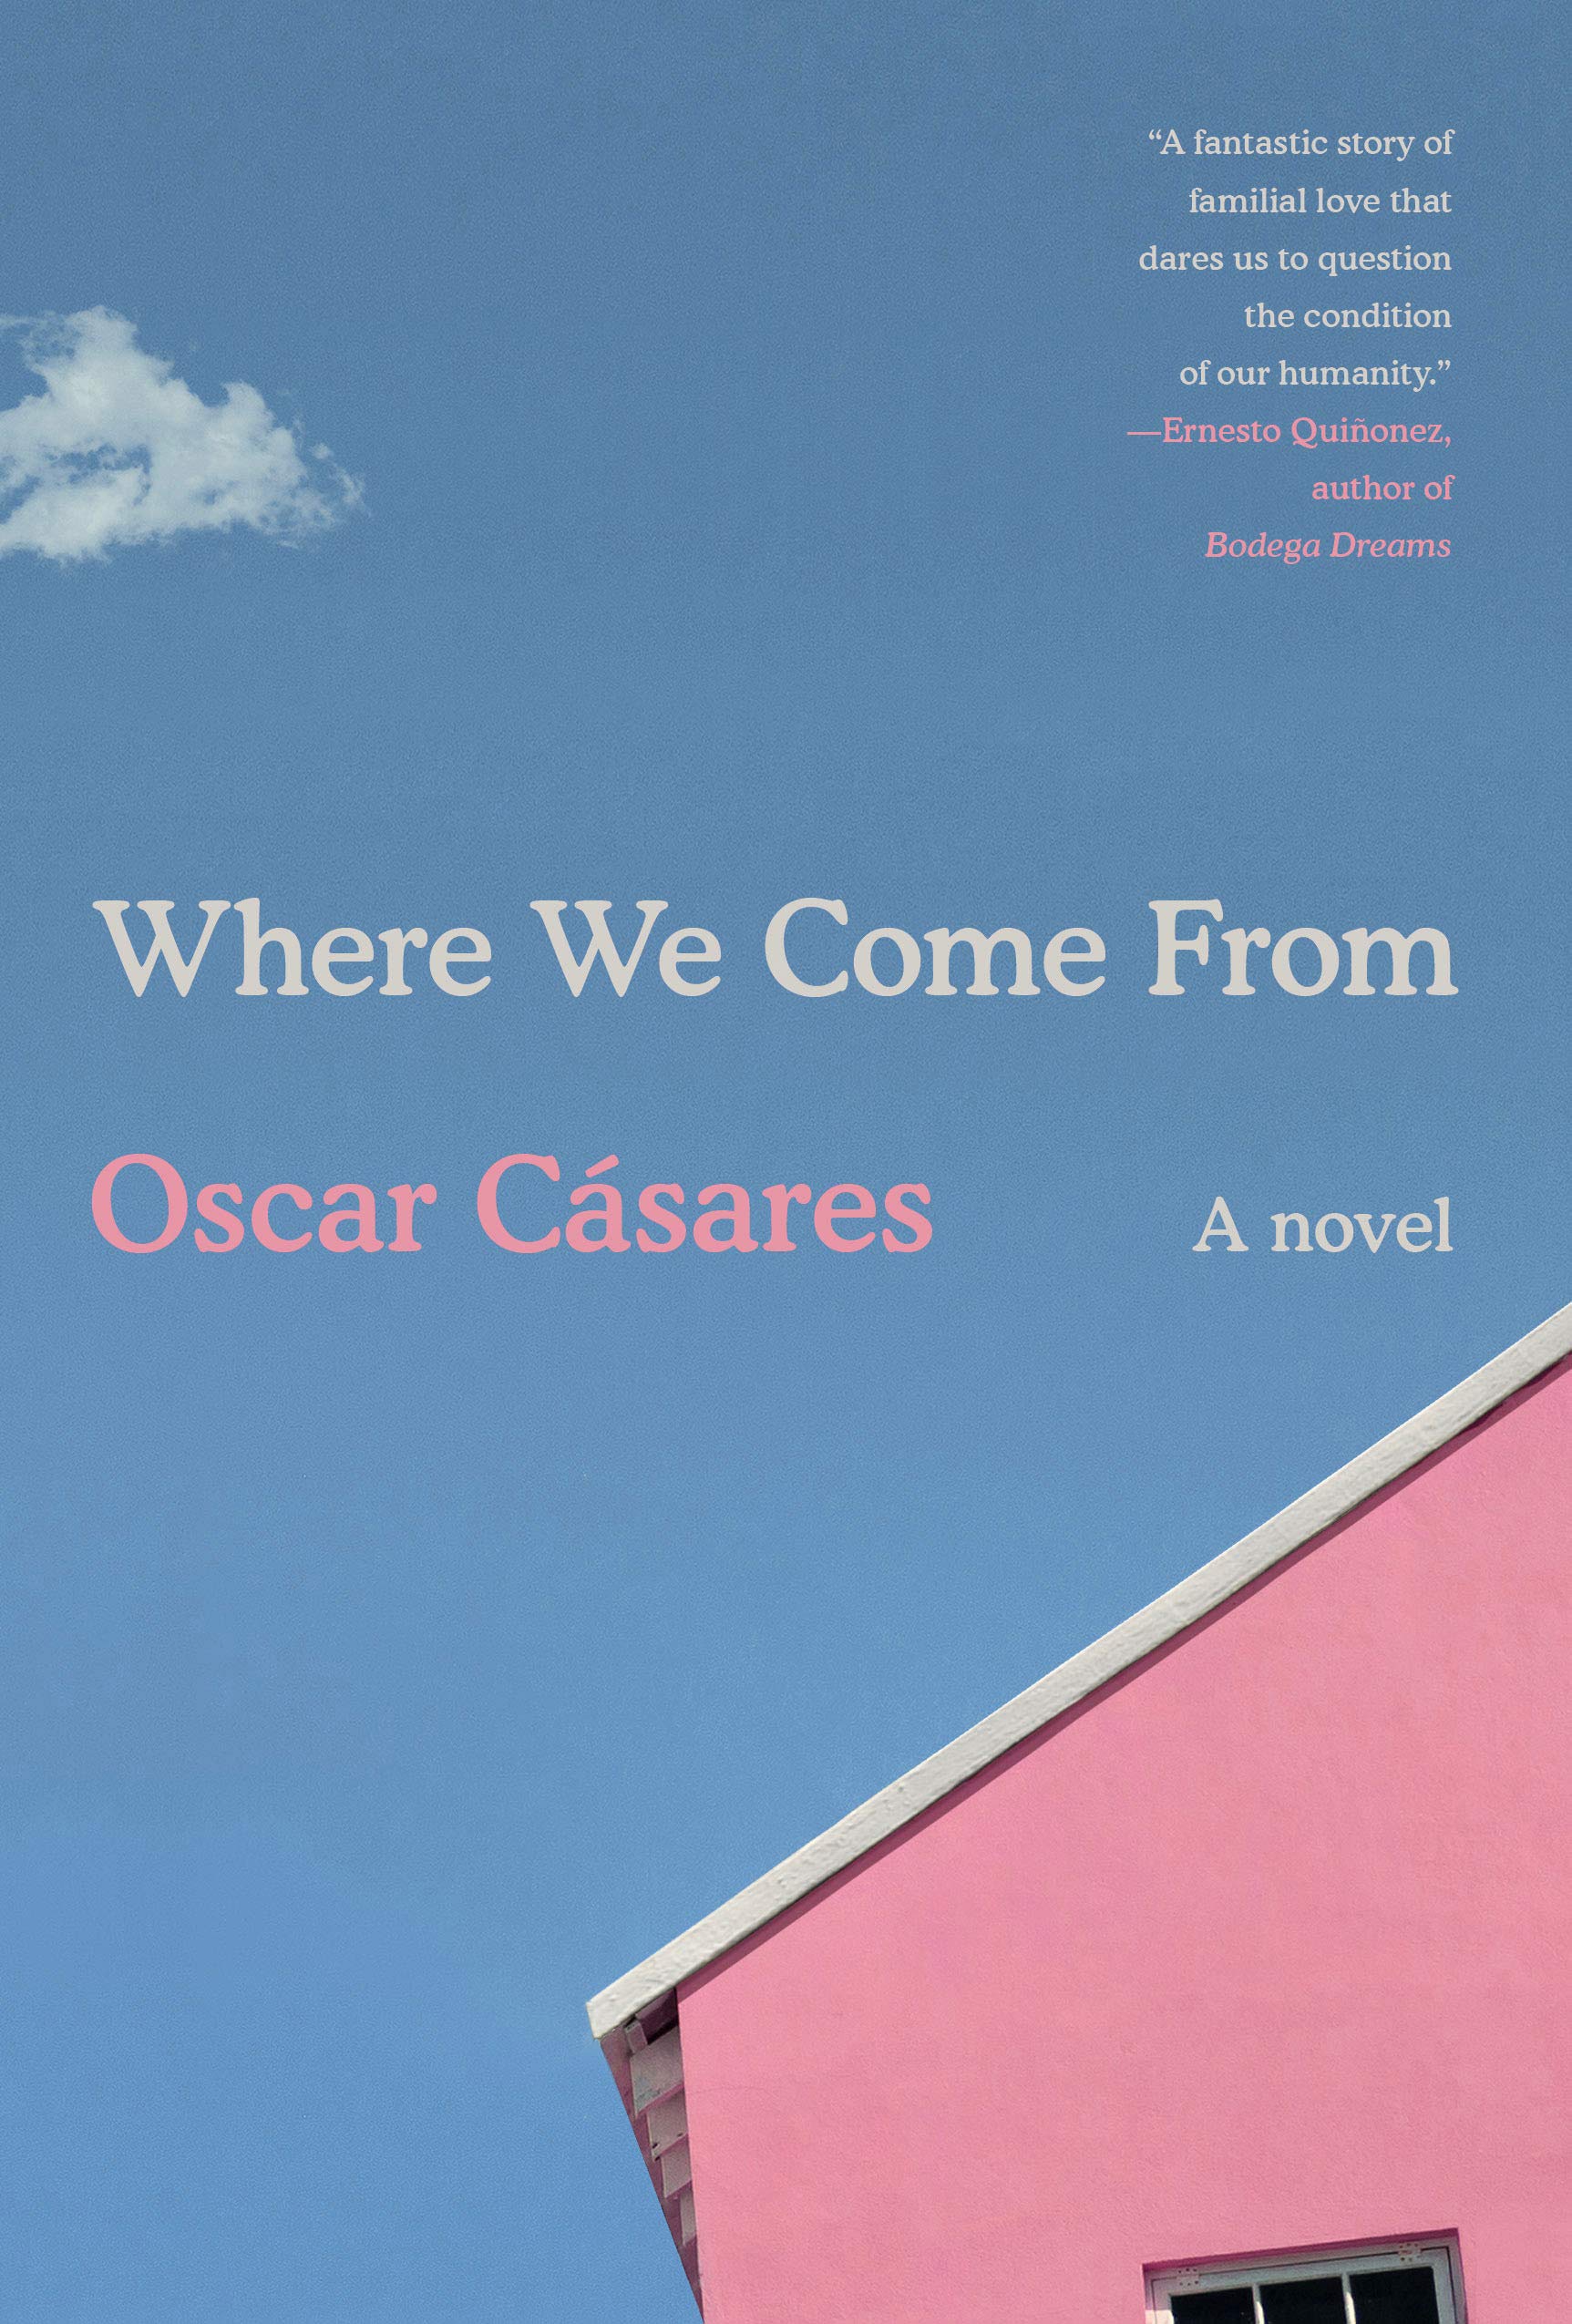 Where We Come From by Oscar Cásares image